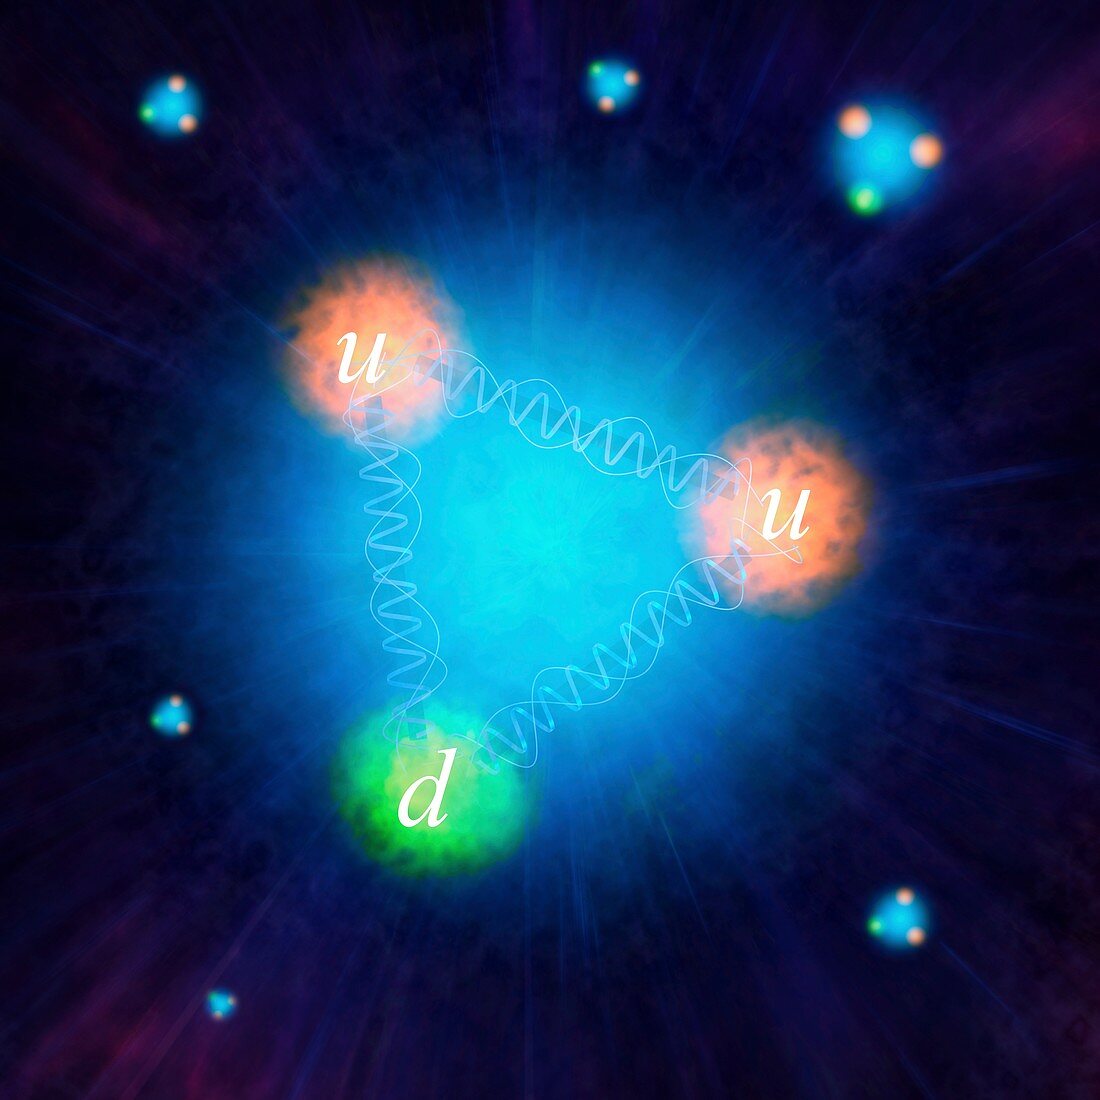 Artwork of the structure of a proton